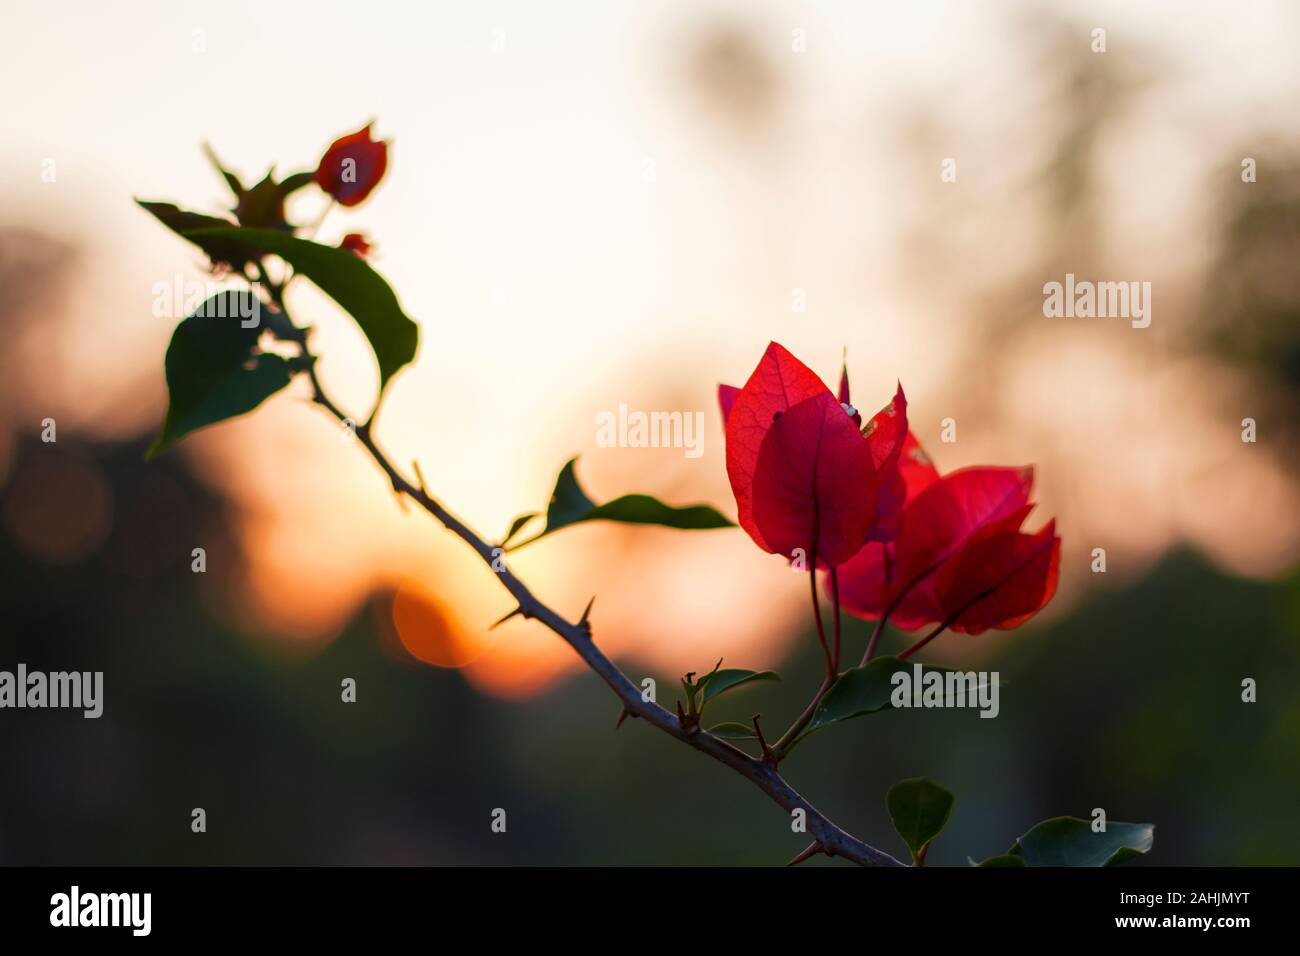 Beautiful Bougainvillea flowers with dreamy background. Stock Photo